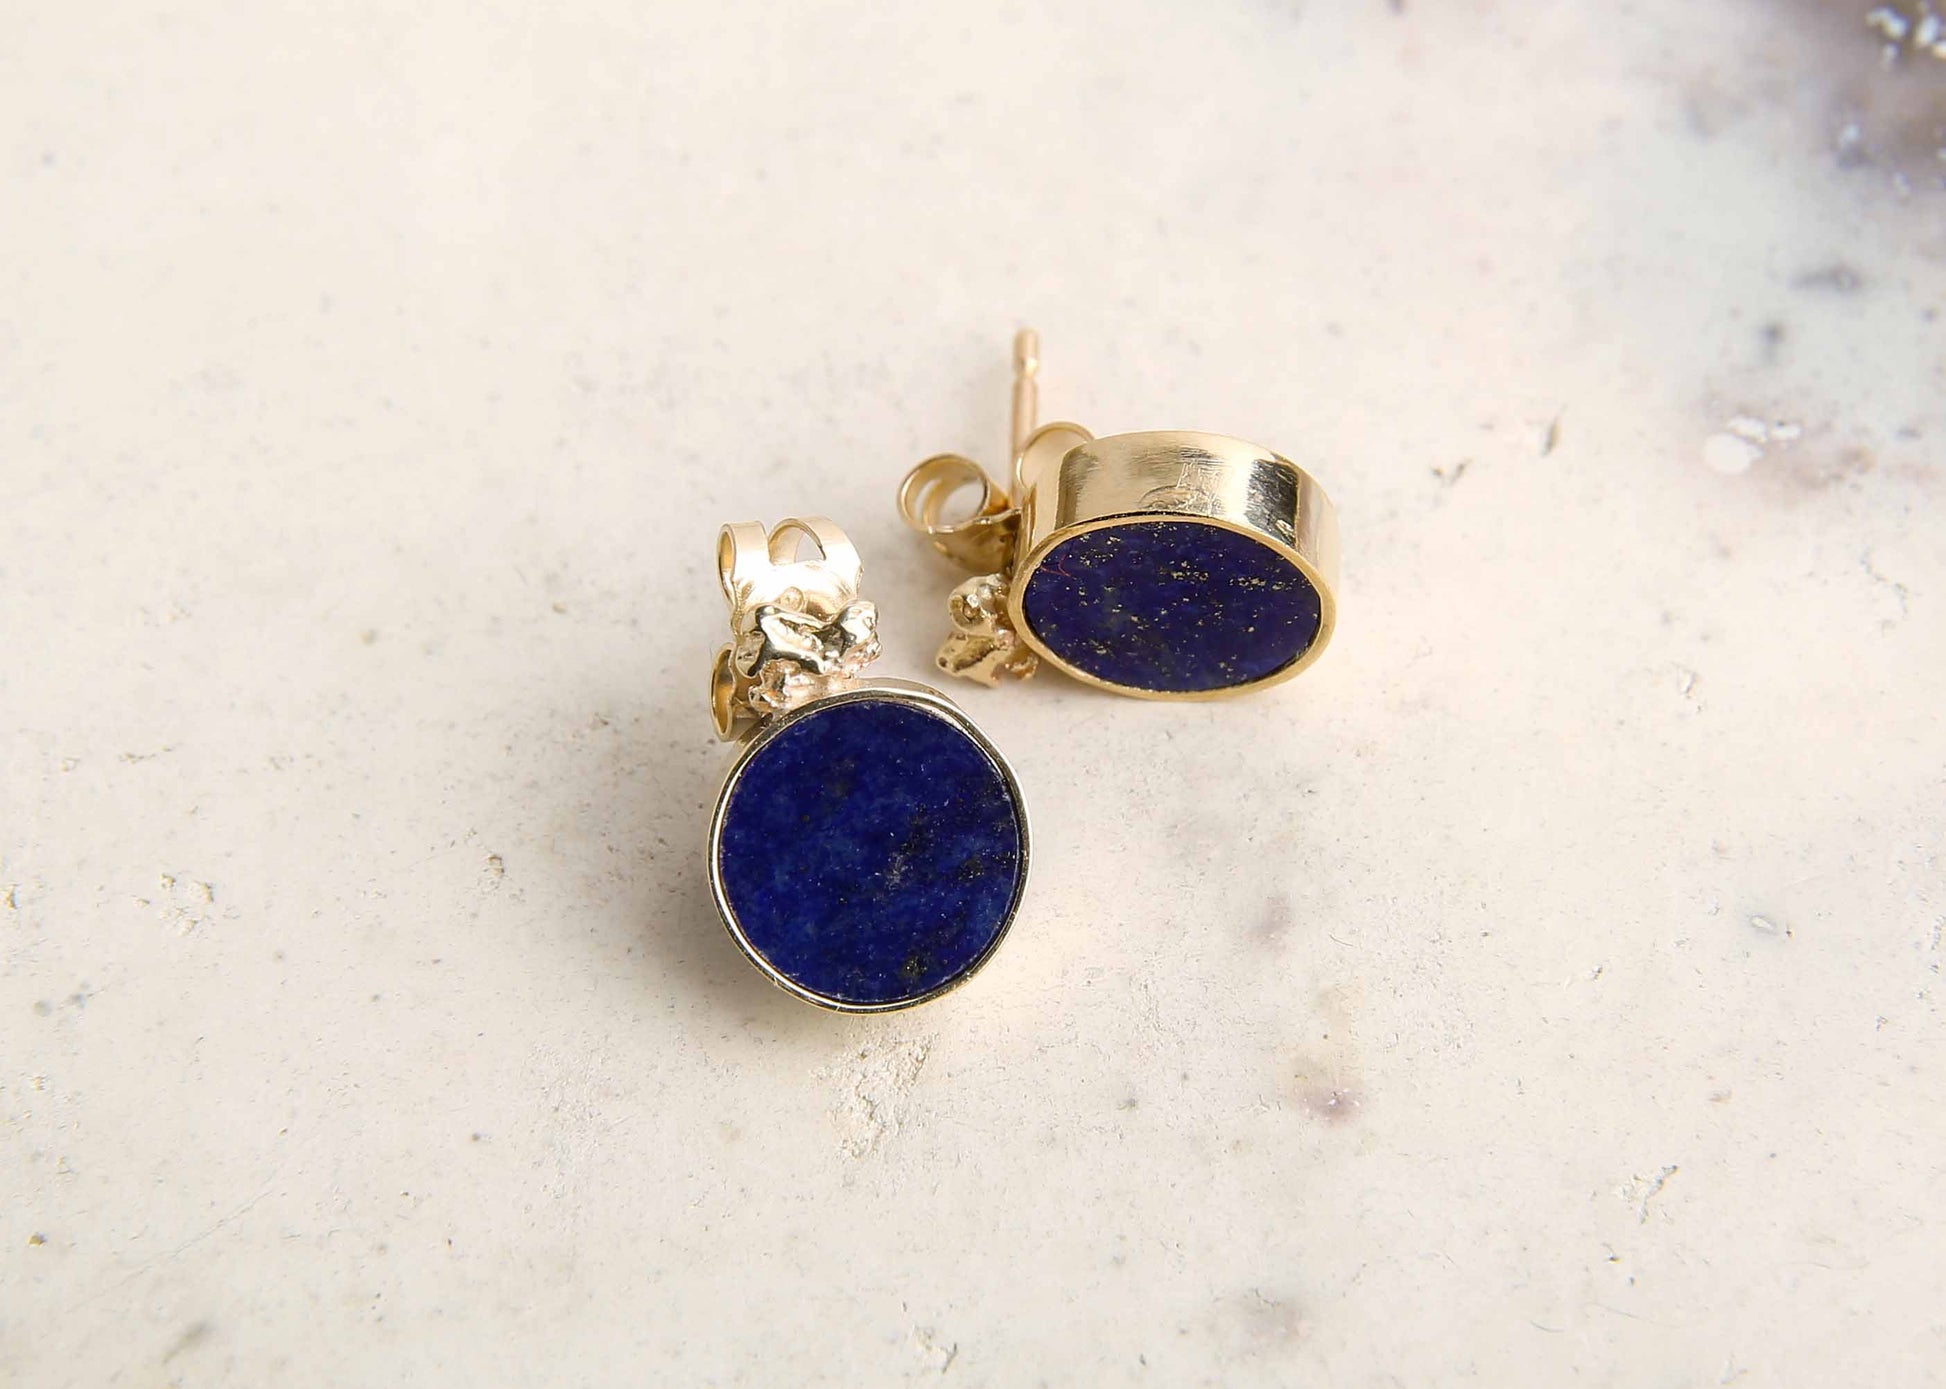 Blue lapis lazuli and gold disc stud earrings on pink marble table